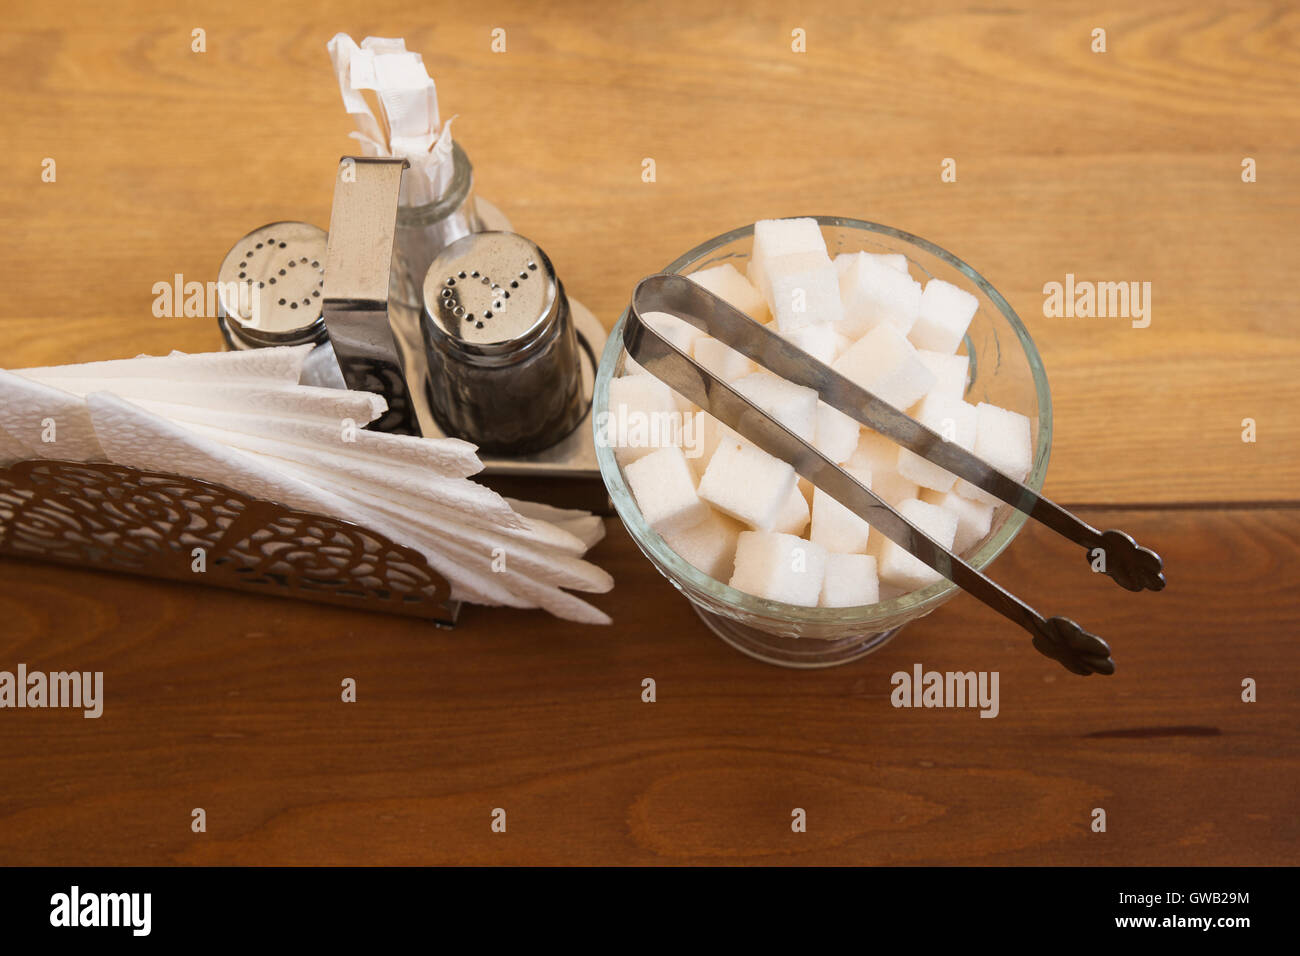 Brown color table with cube sugar bowl. White napkins, salt and pepper set, sugar tongs. Stock Photo